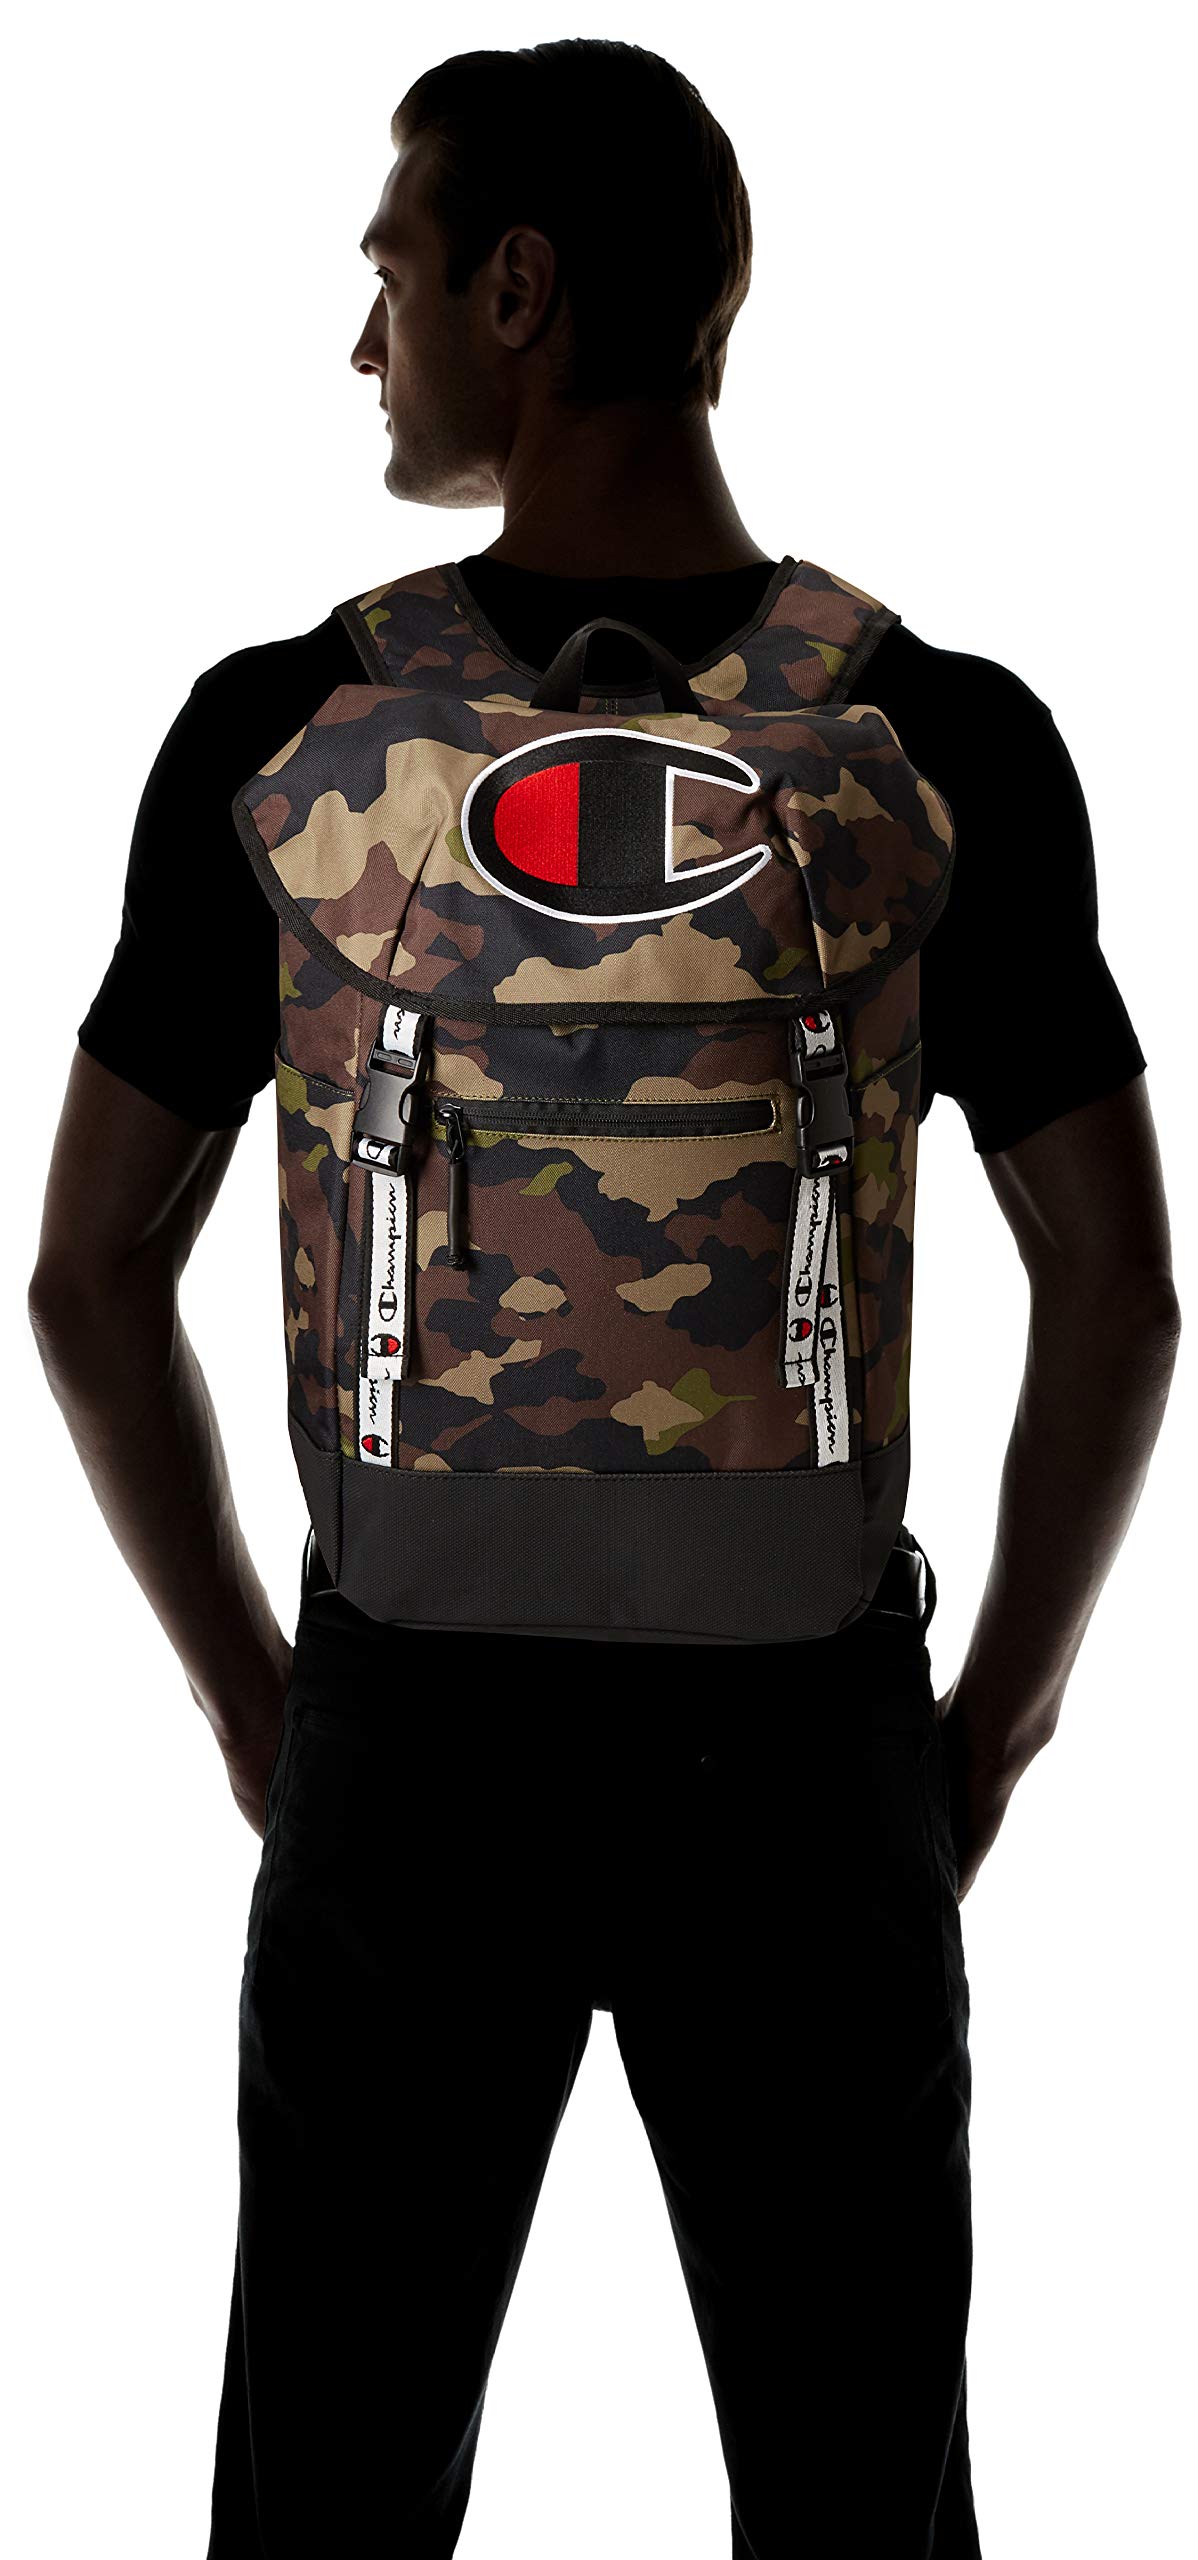 Champion Top Load Backpack